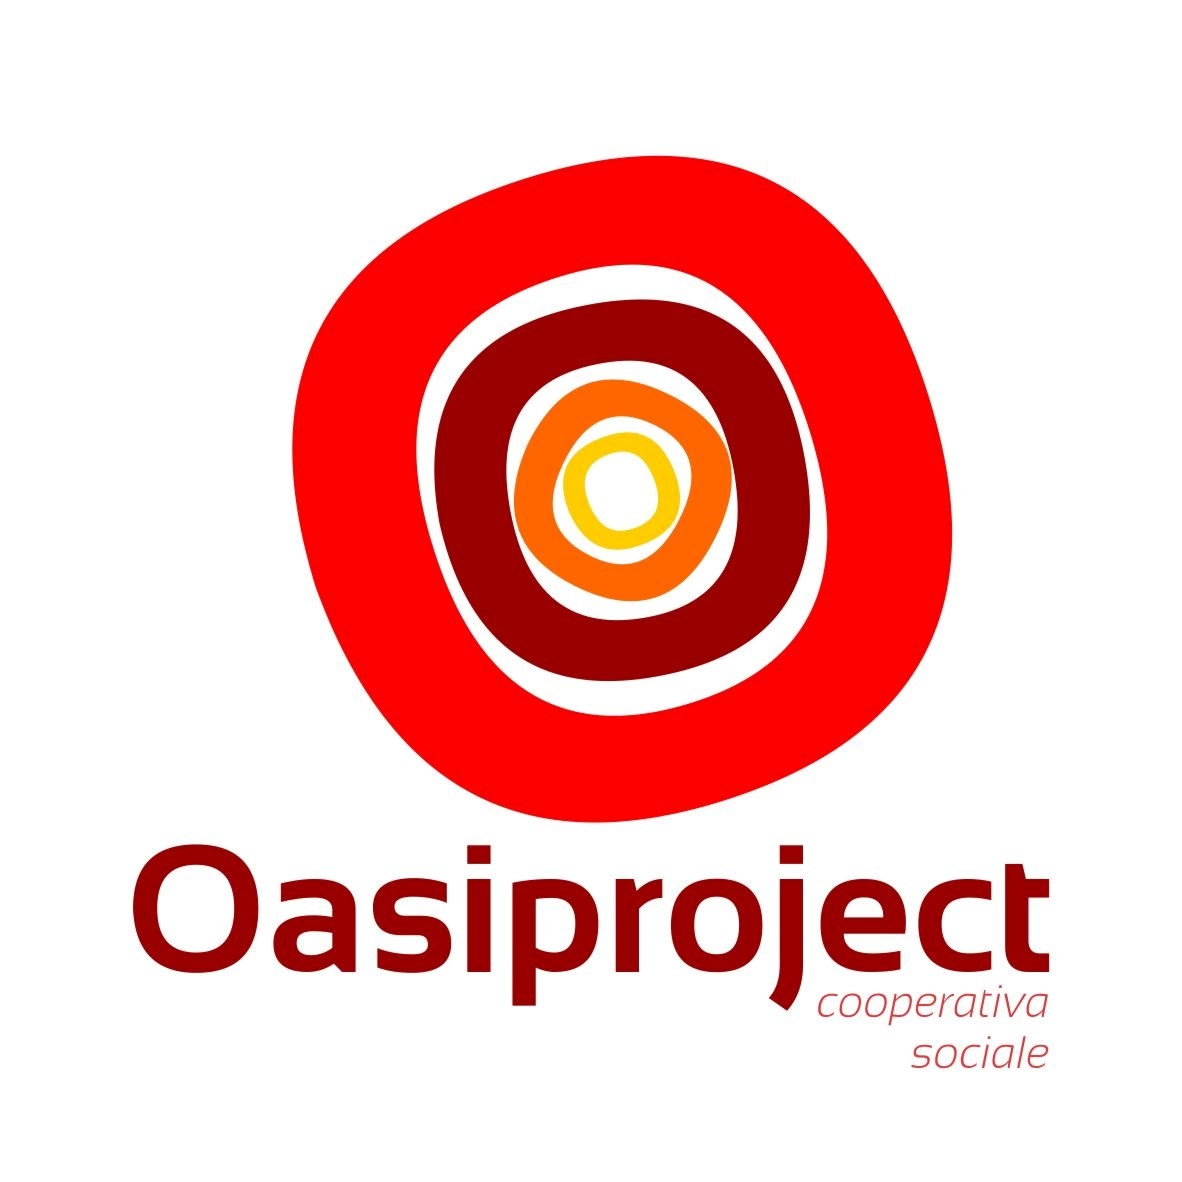 OASIPROJECT